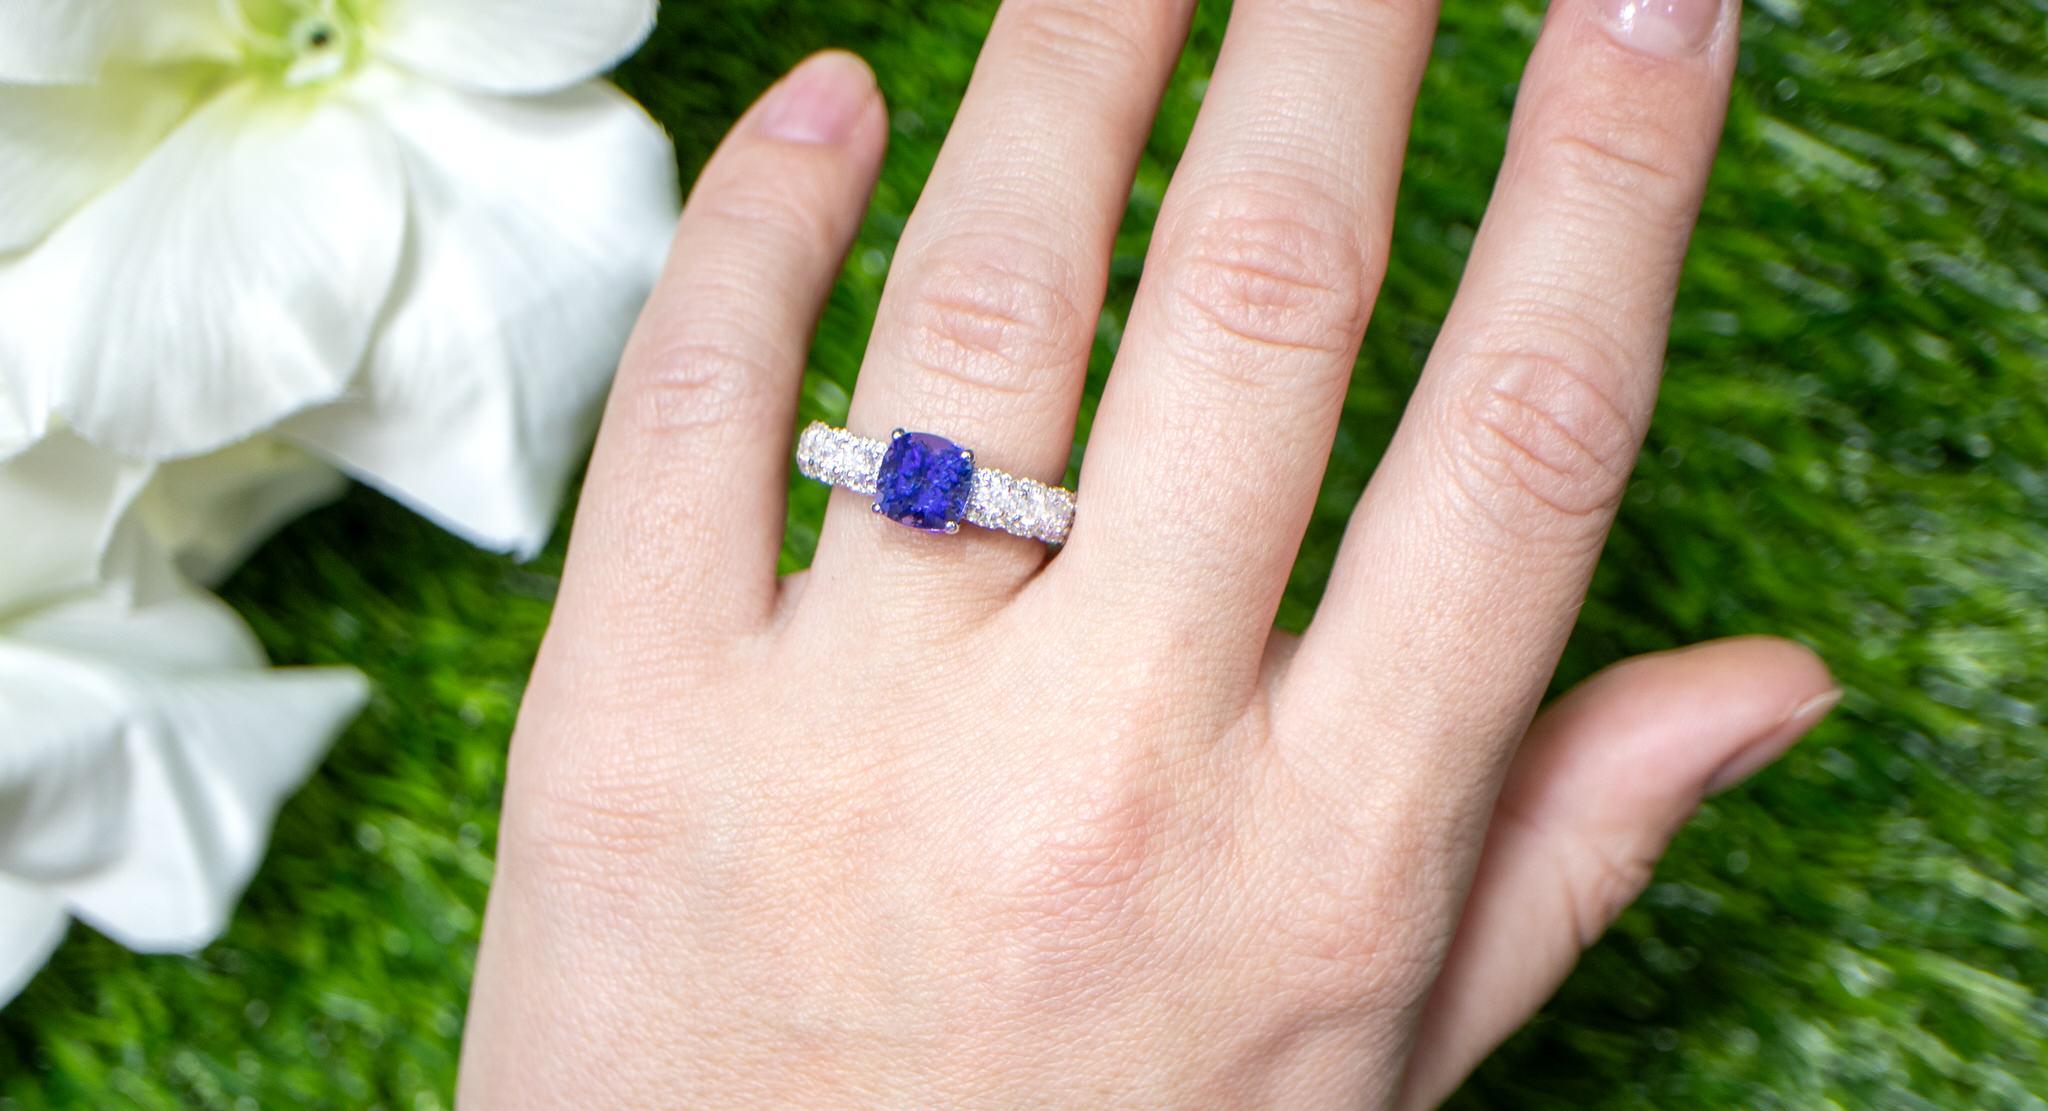 Cushion Cut Tanzanite Ring With Diamond Setting 2.82 Carats 18K Gold For Sale